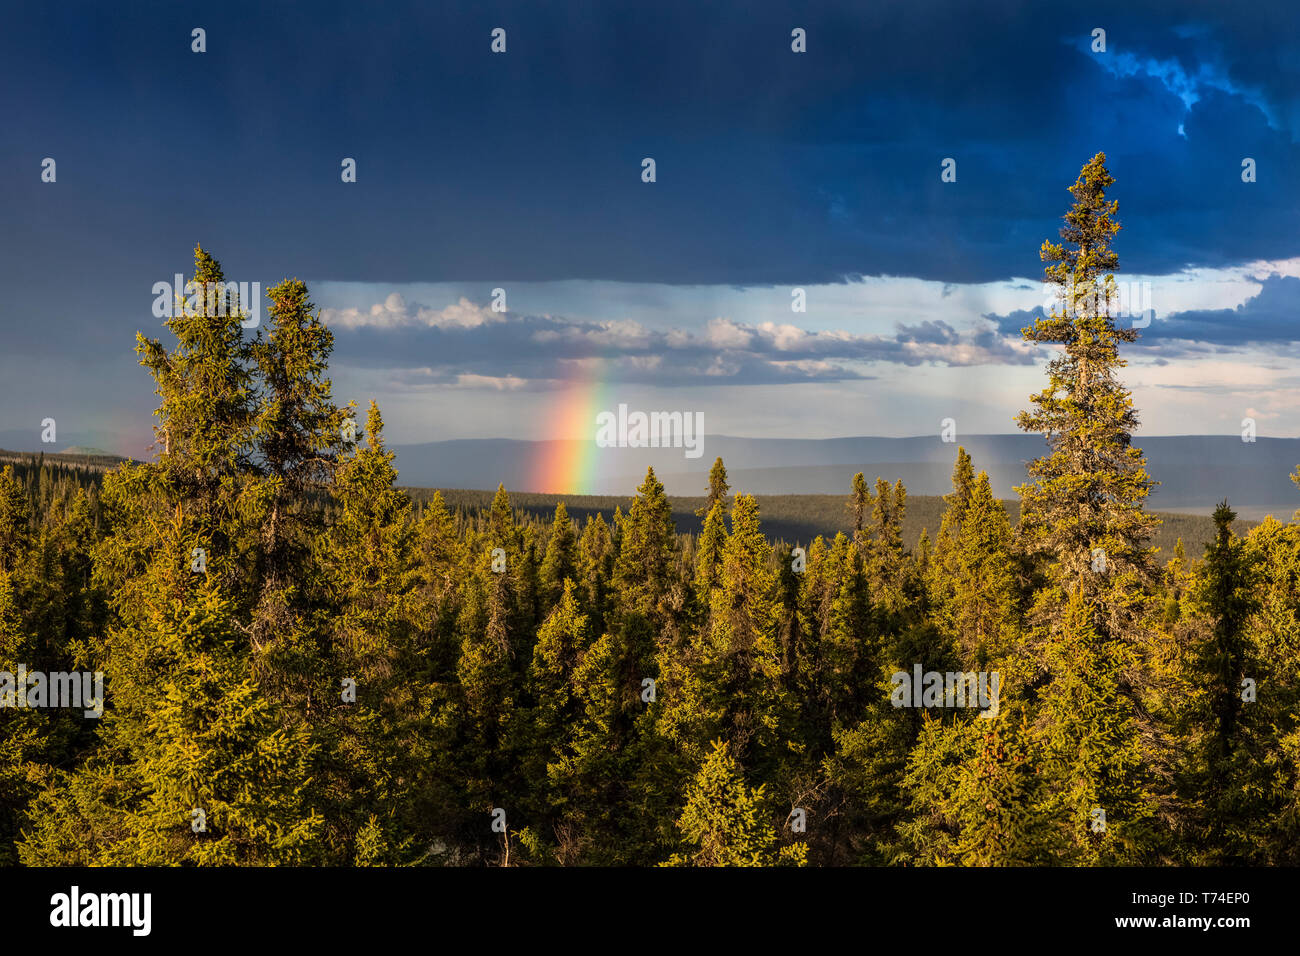 Rainbow poking through storm clouds over a spruce forest in summertime, over the White Mountains, as seen from the Summit Trail Stock Photo